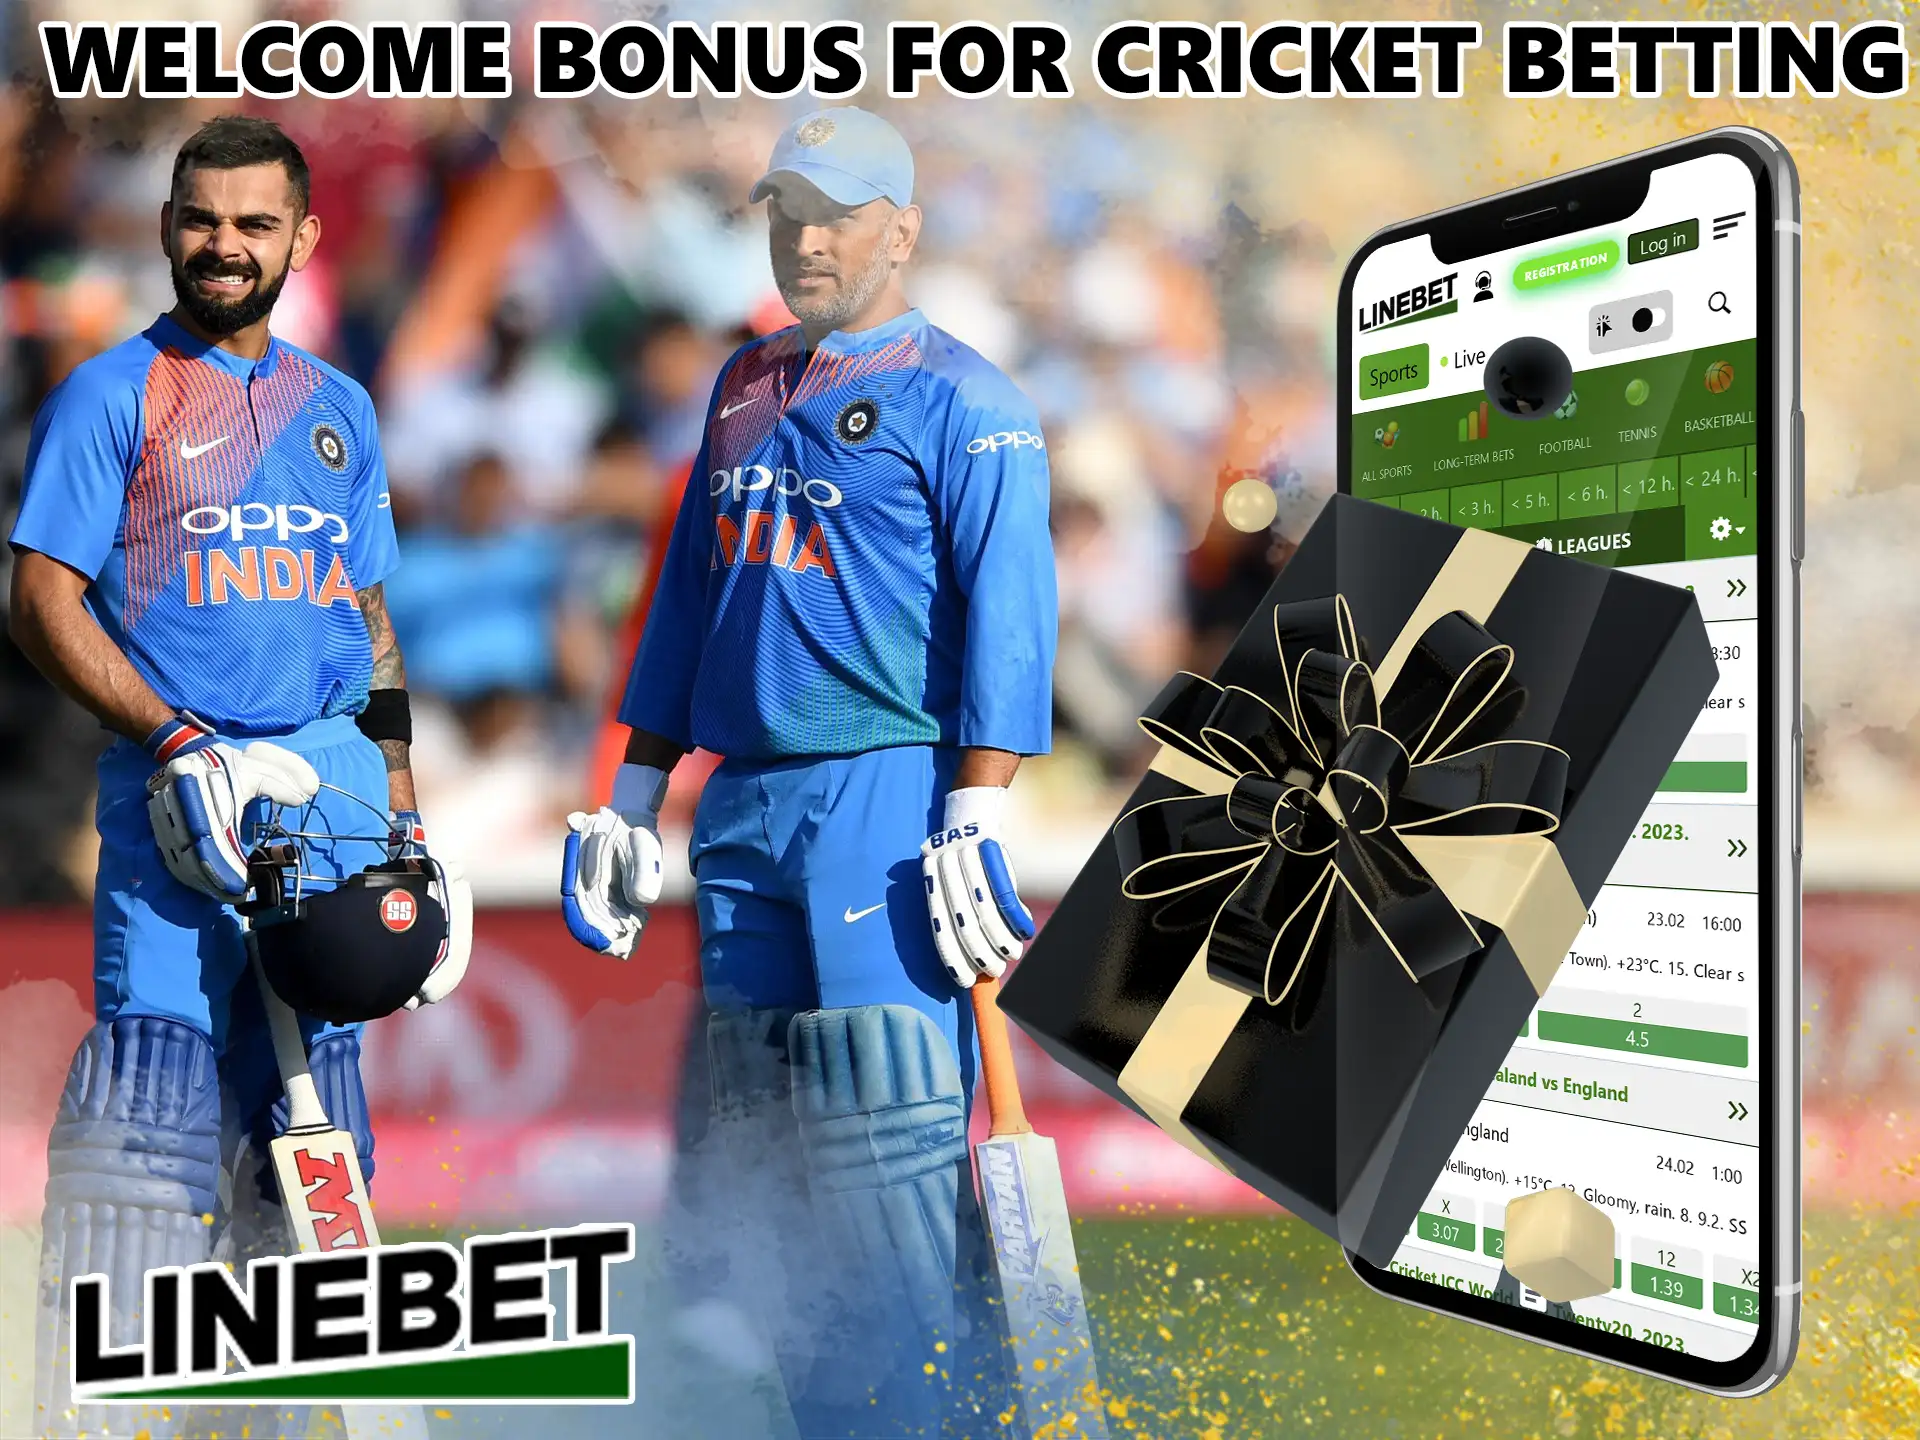 Indian players are in for a pleasant surprise, you can get UP TO 8862 INR in Linebet on your first deposit.